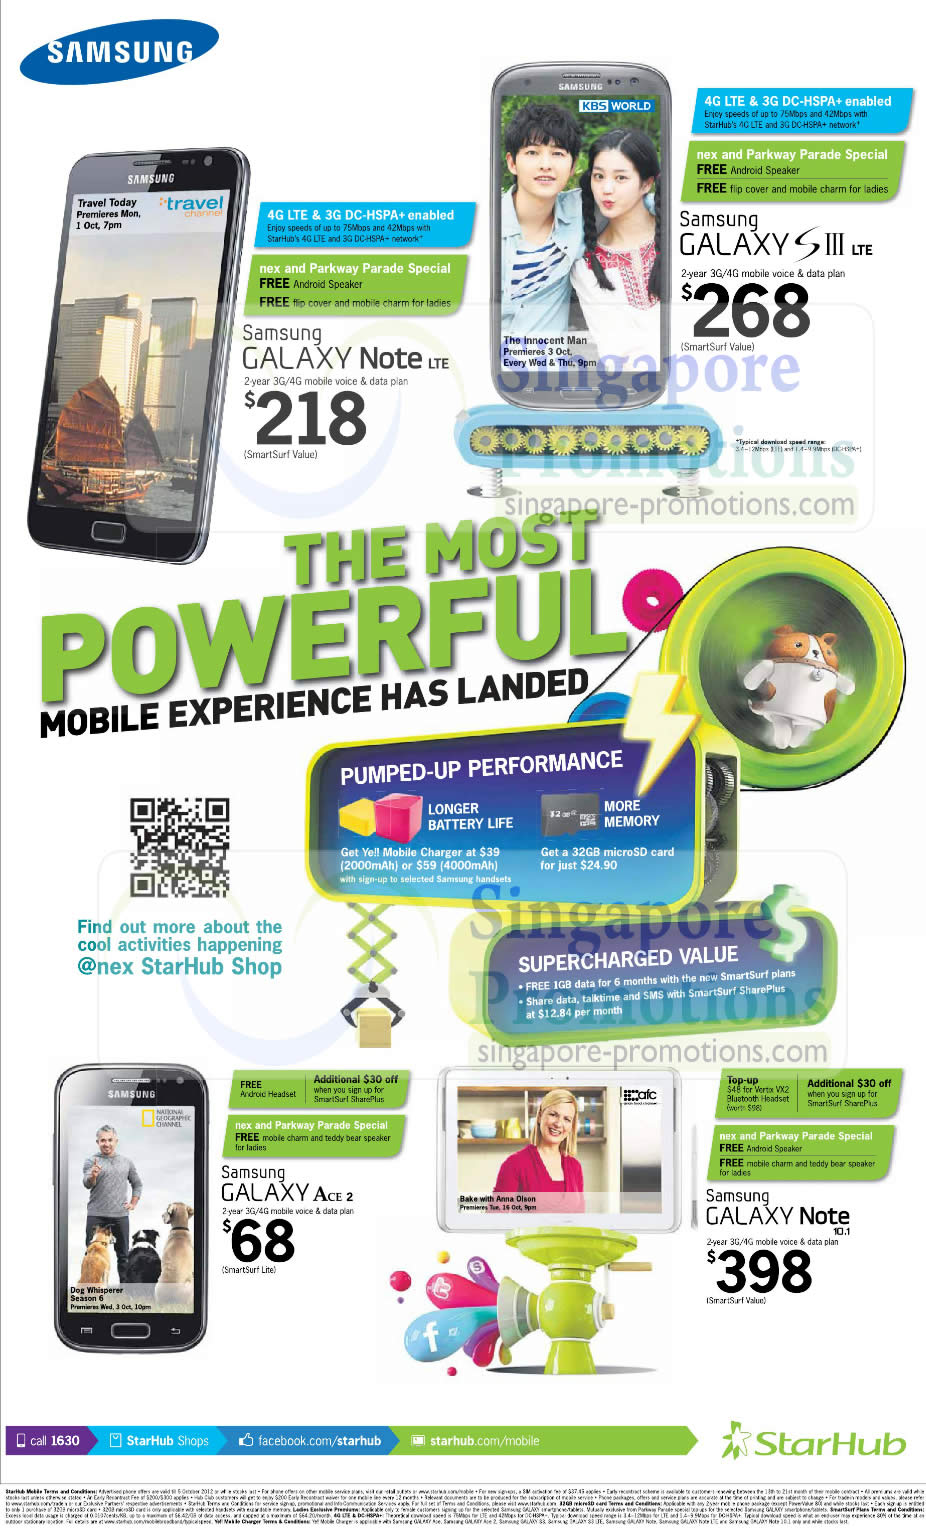 Featured image for Starhub Smartphones, Tablets, Cable TV & Mobile/Home Broadband Offers 29 Sep - 5 Oct 2012